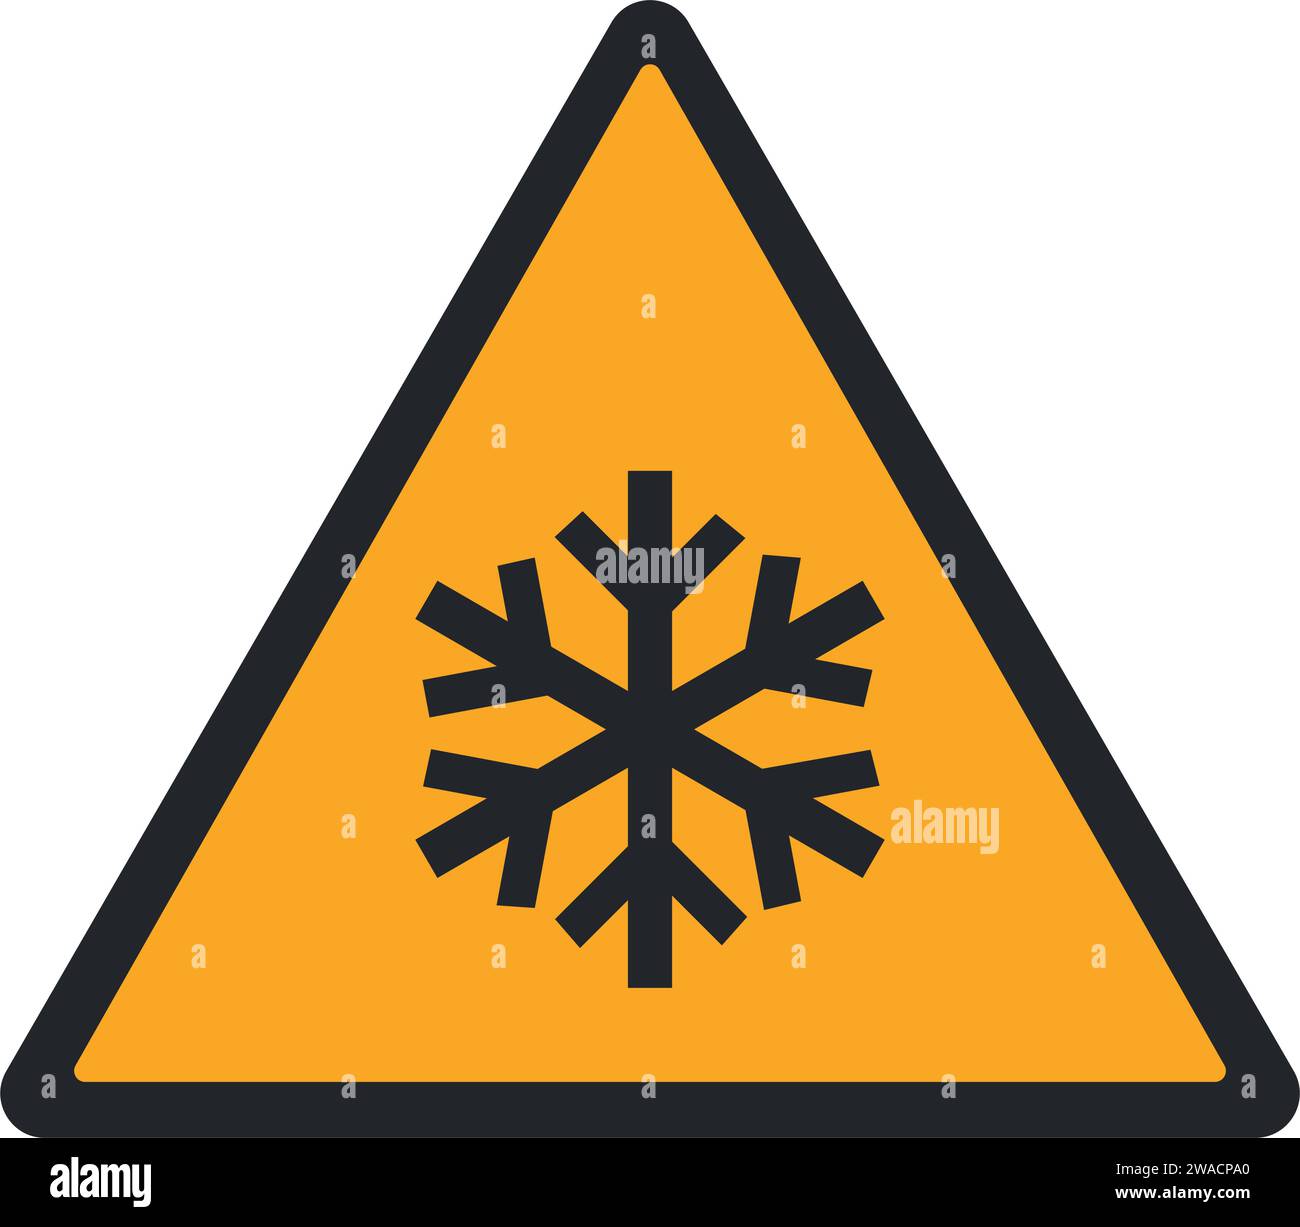 WARNING PICTOGRAM, RISK OF LOW TEMPERATURE ISO 7010 - W010 Stock Vector